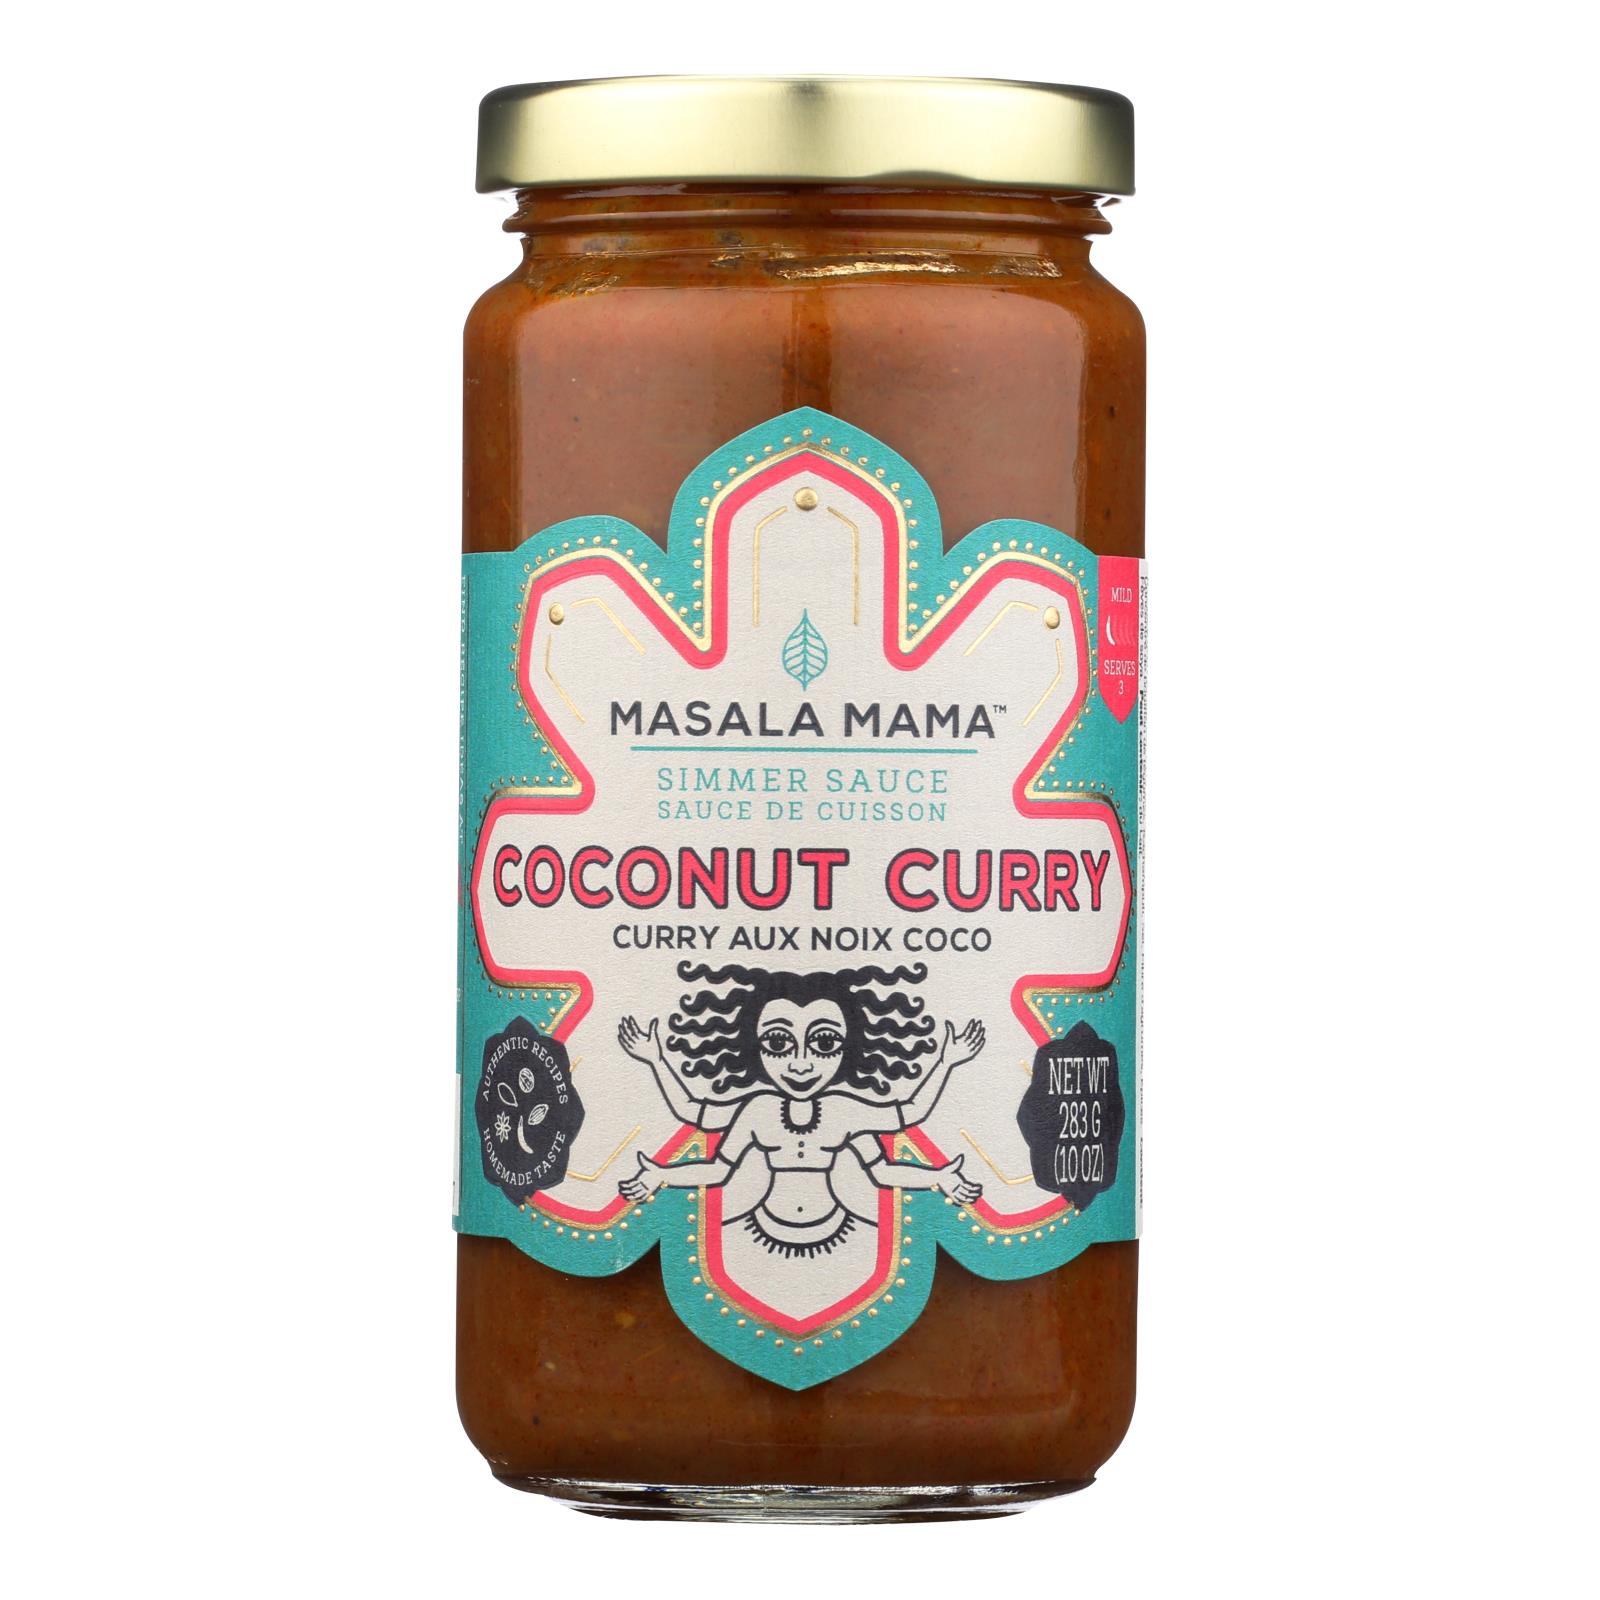 Masala Mama Coconut Curry All Natural Simmer Sauce - 6개 묶음상품 - 10 OZ